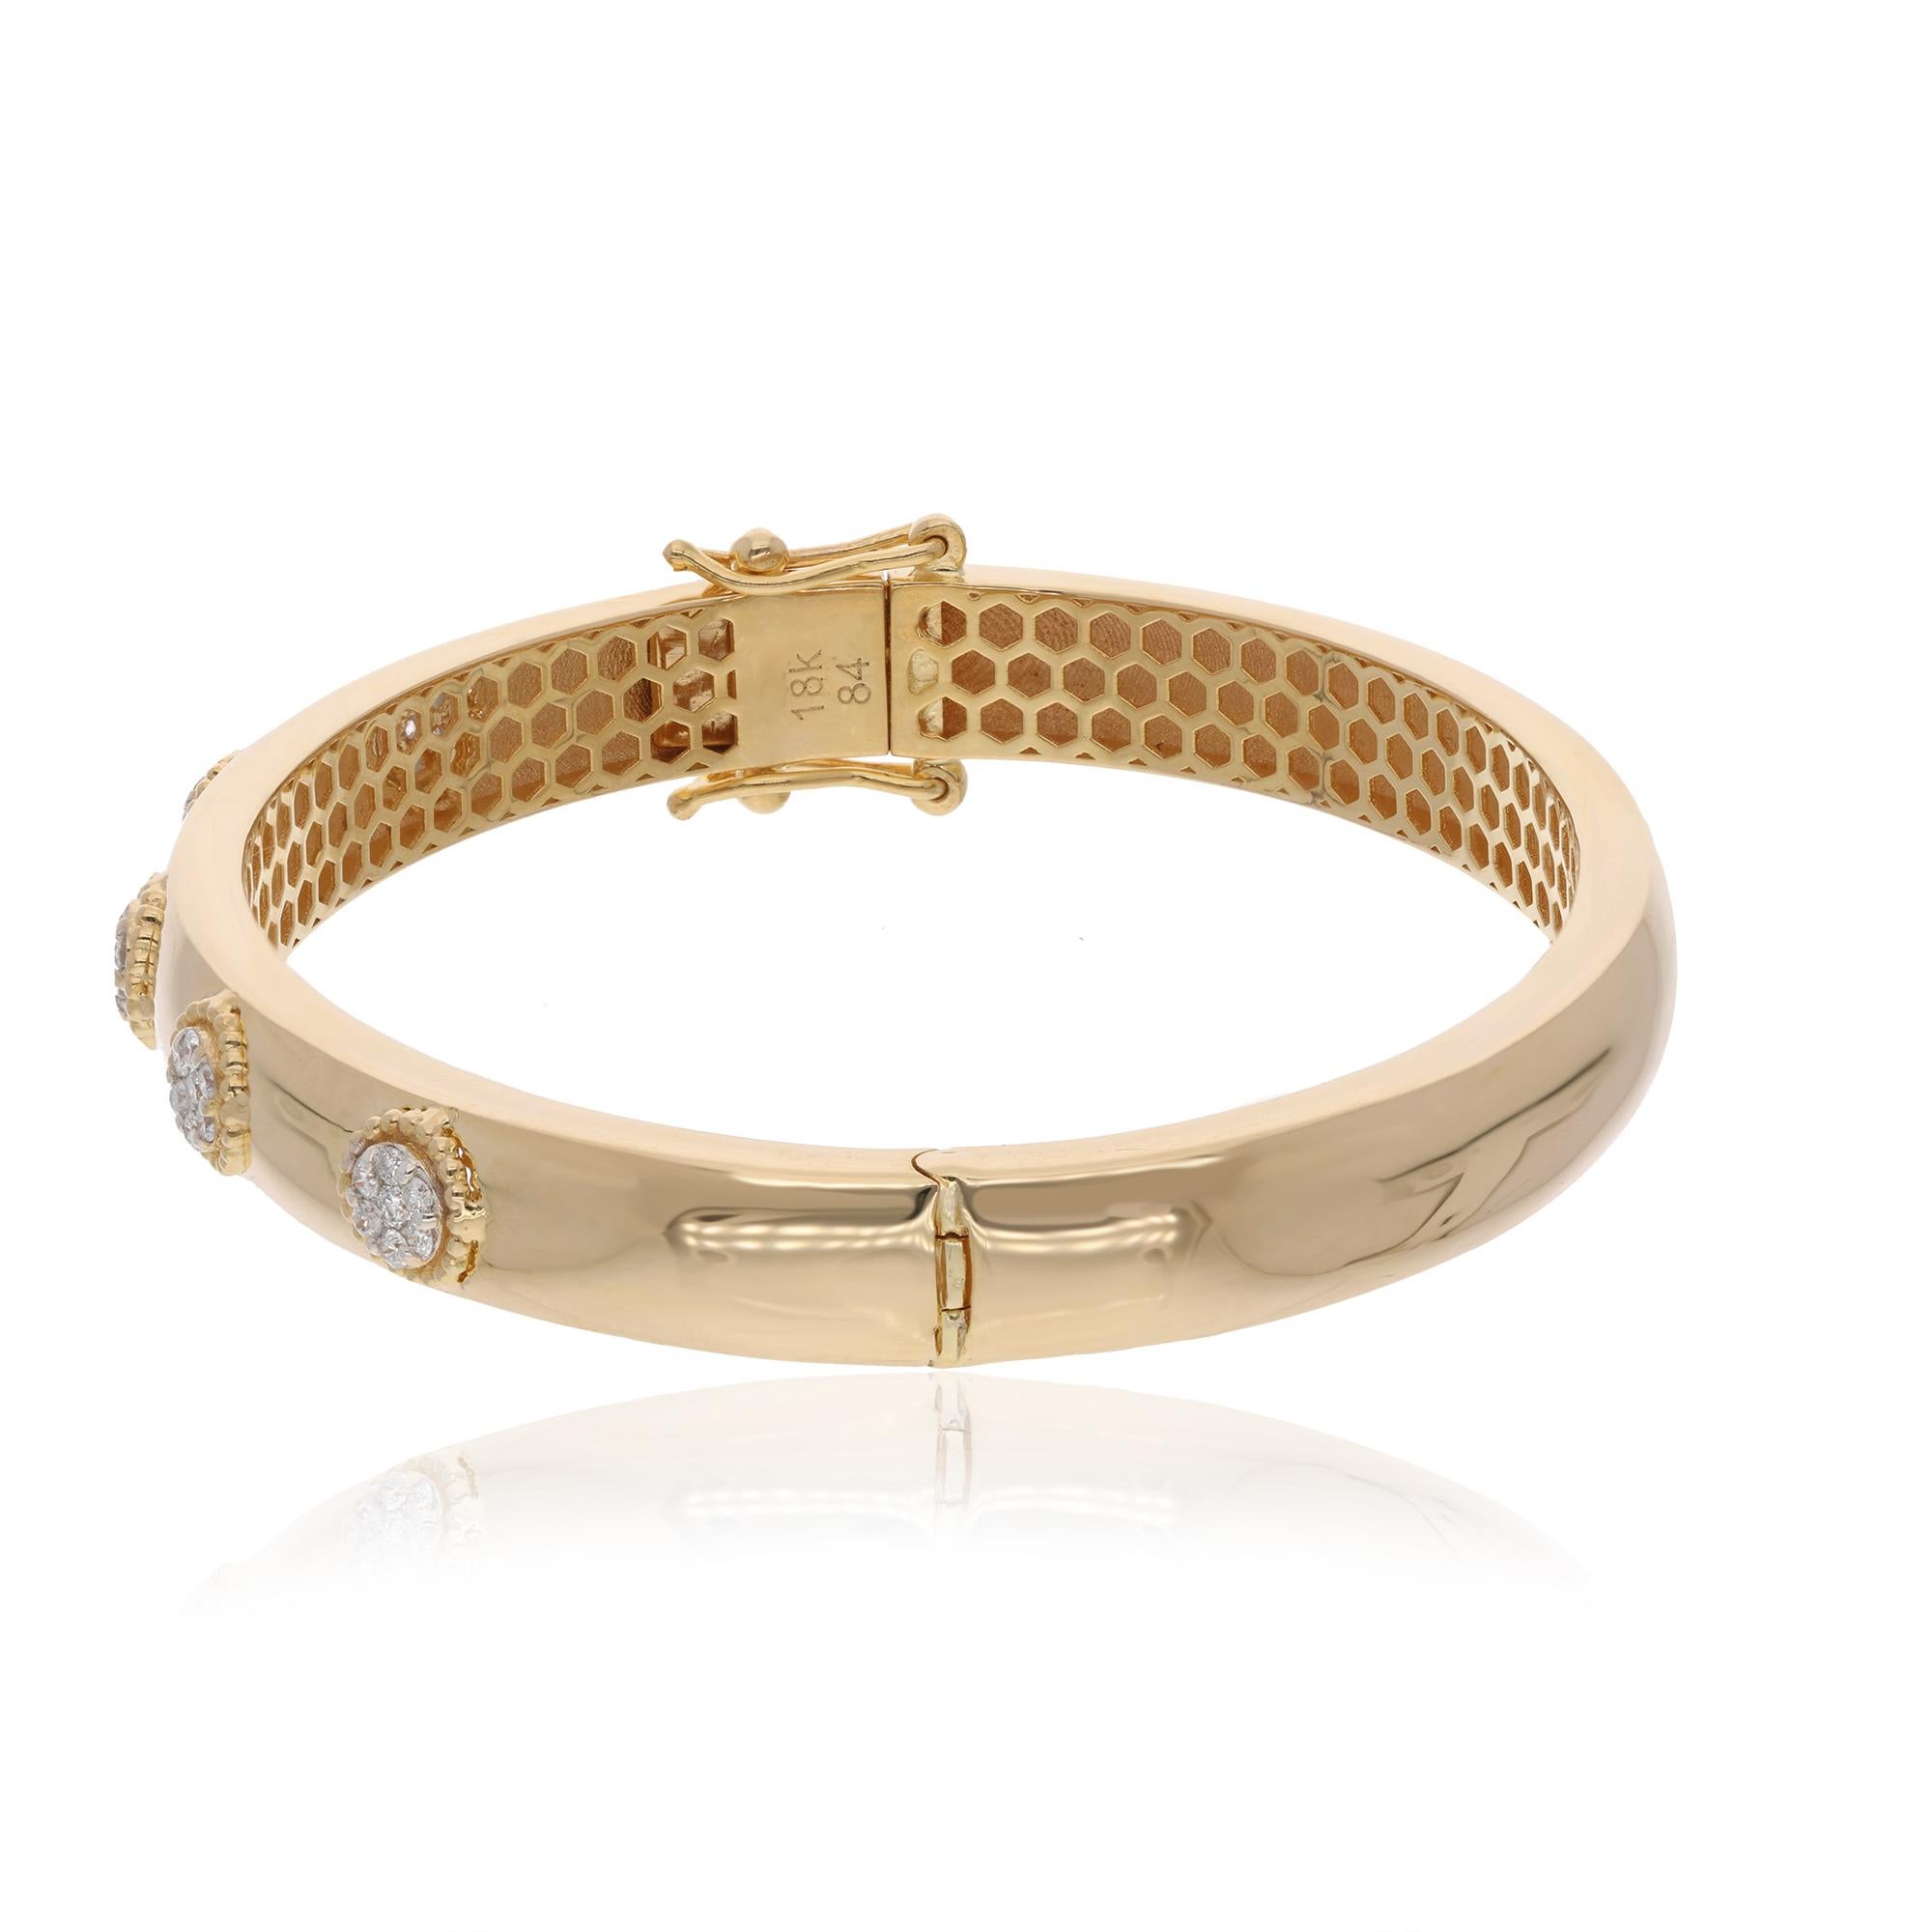 Looking for a stunning piece of jewelry to add to your collection? Look no further than this exquisite Gold Bangle, adorned with a cluster of pave diamonds! The cluster of diamonds is expertly set, creating a dazzling display that catches the light